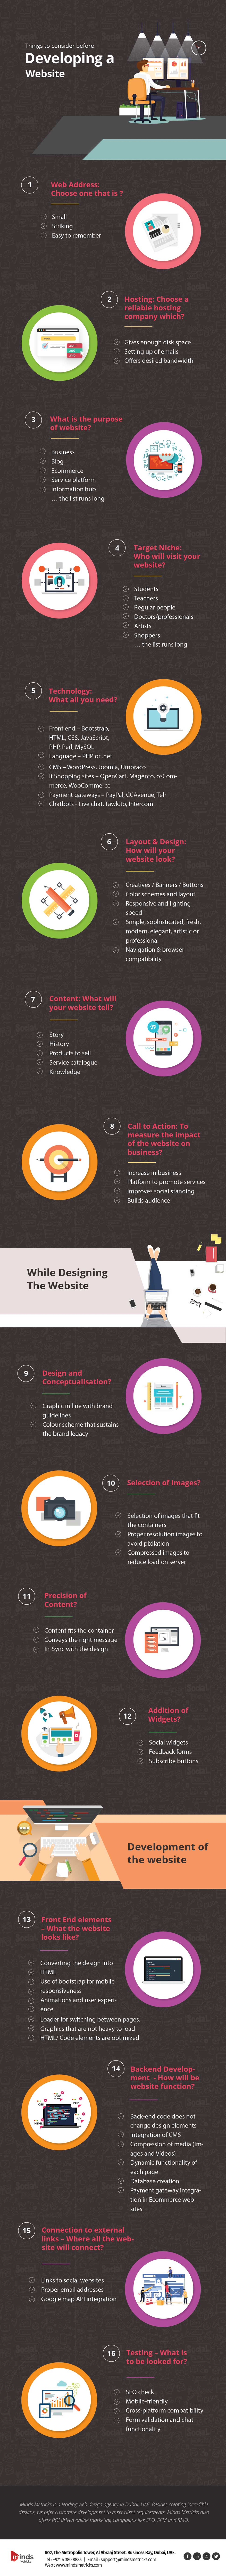 building a website infographic